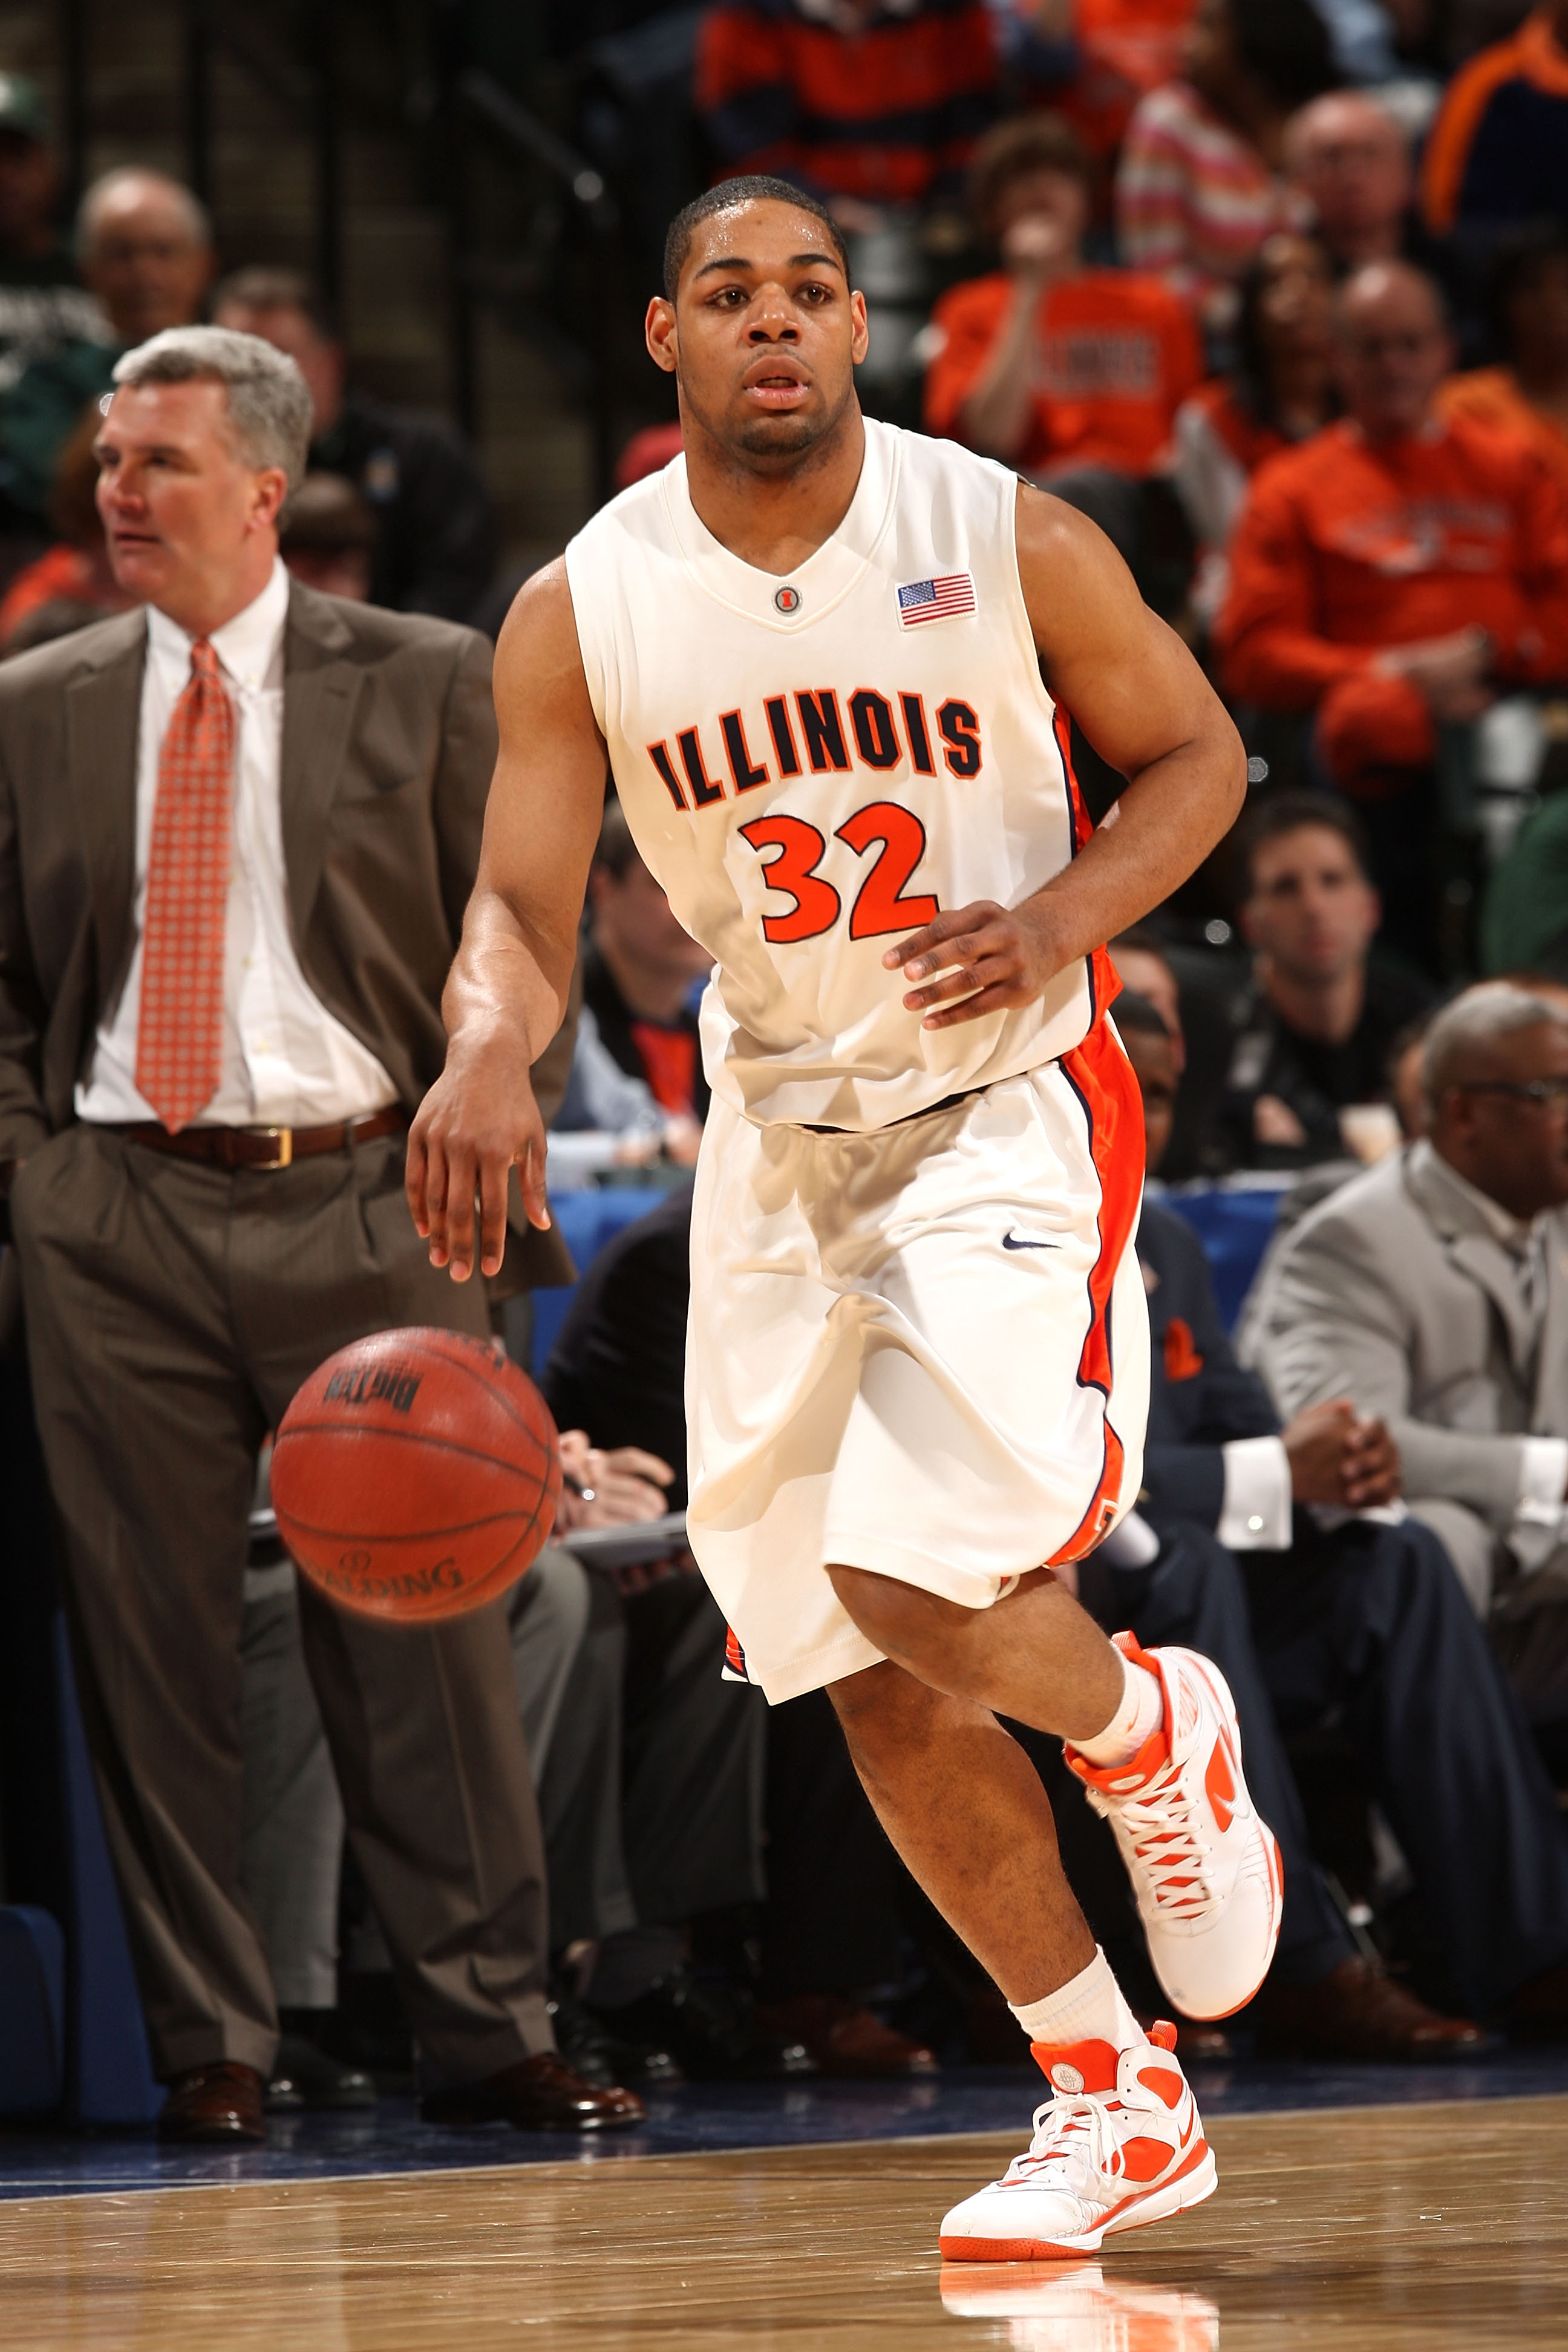 College Basketball 2010 11 Predictions The Nation s Top 50 Players 